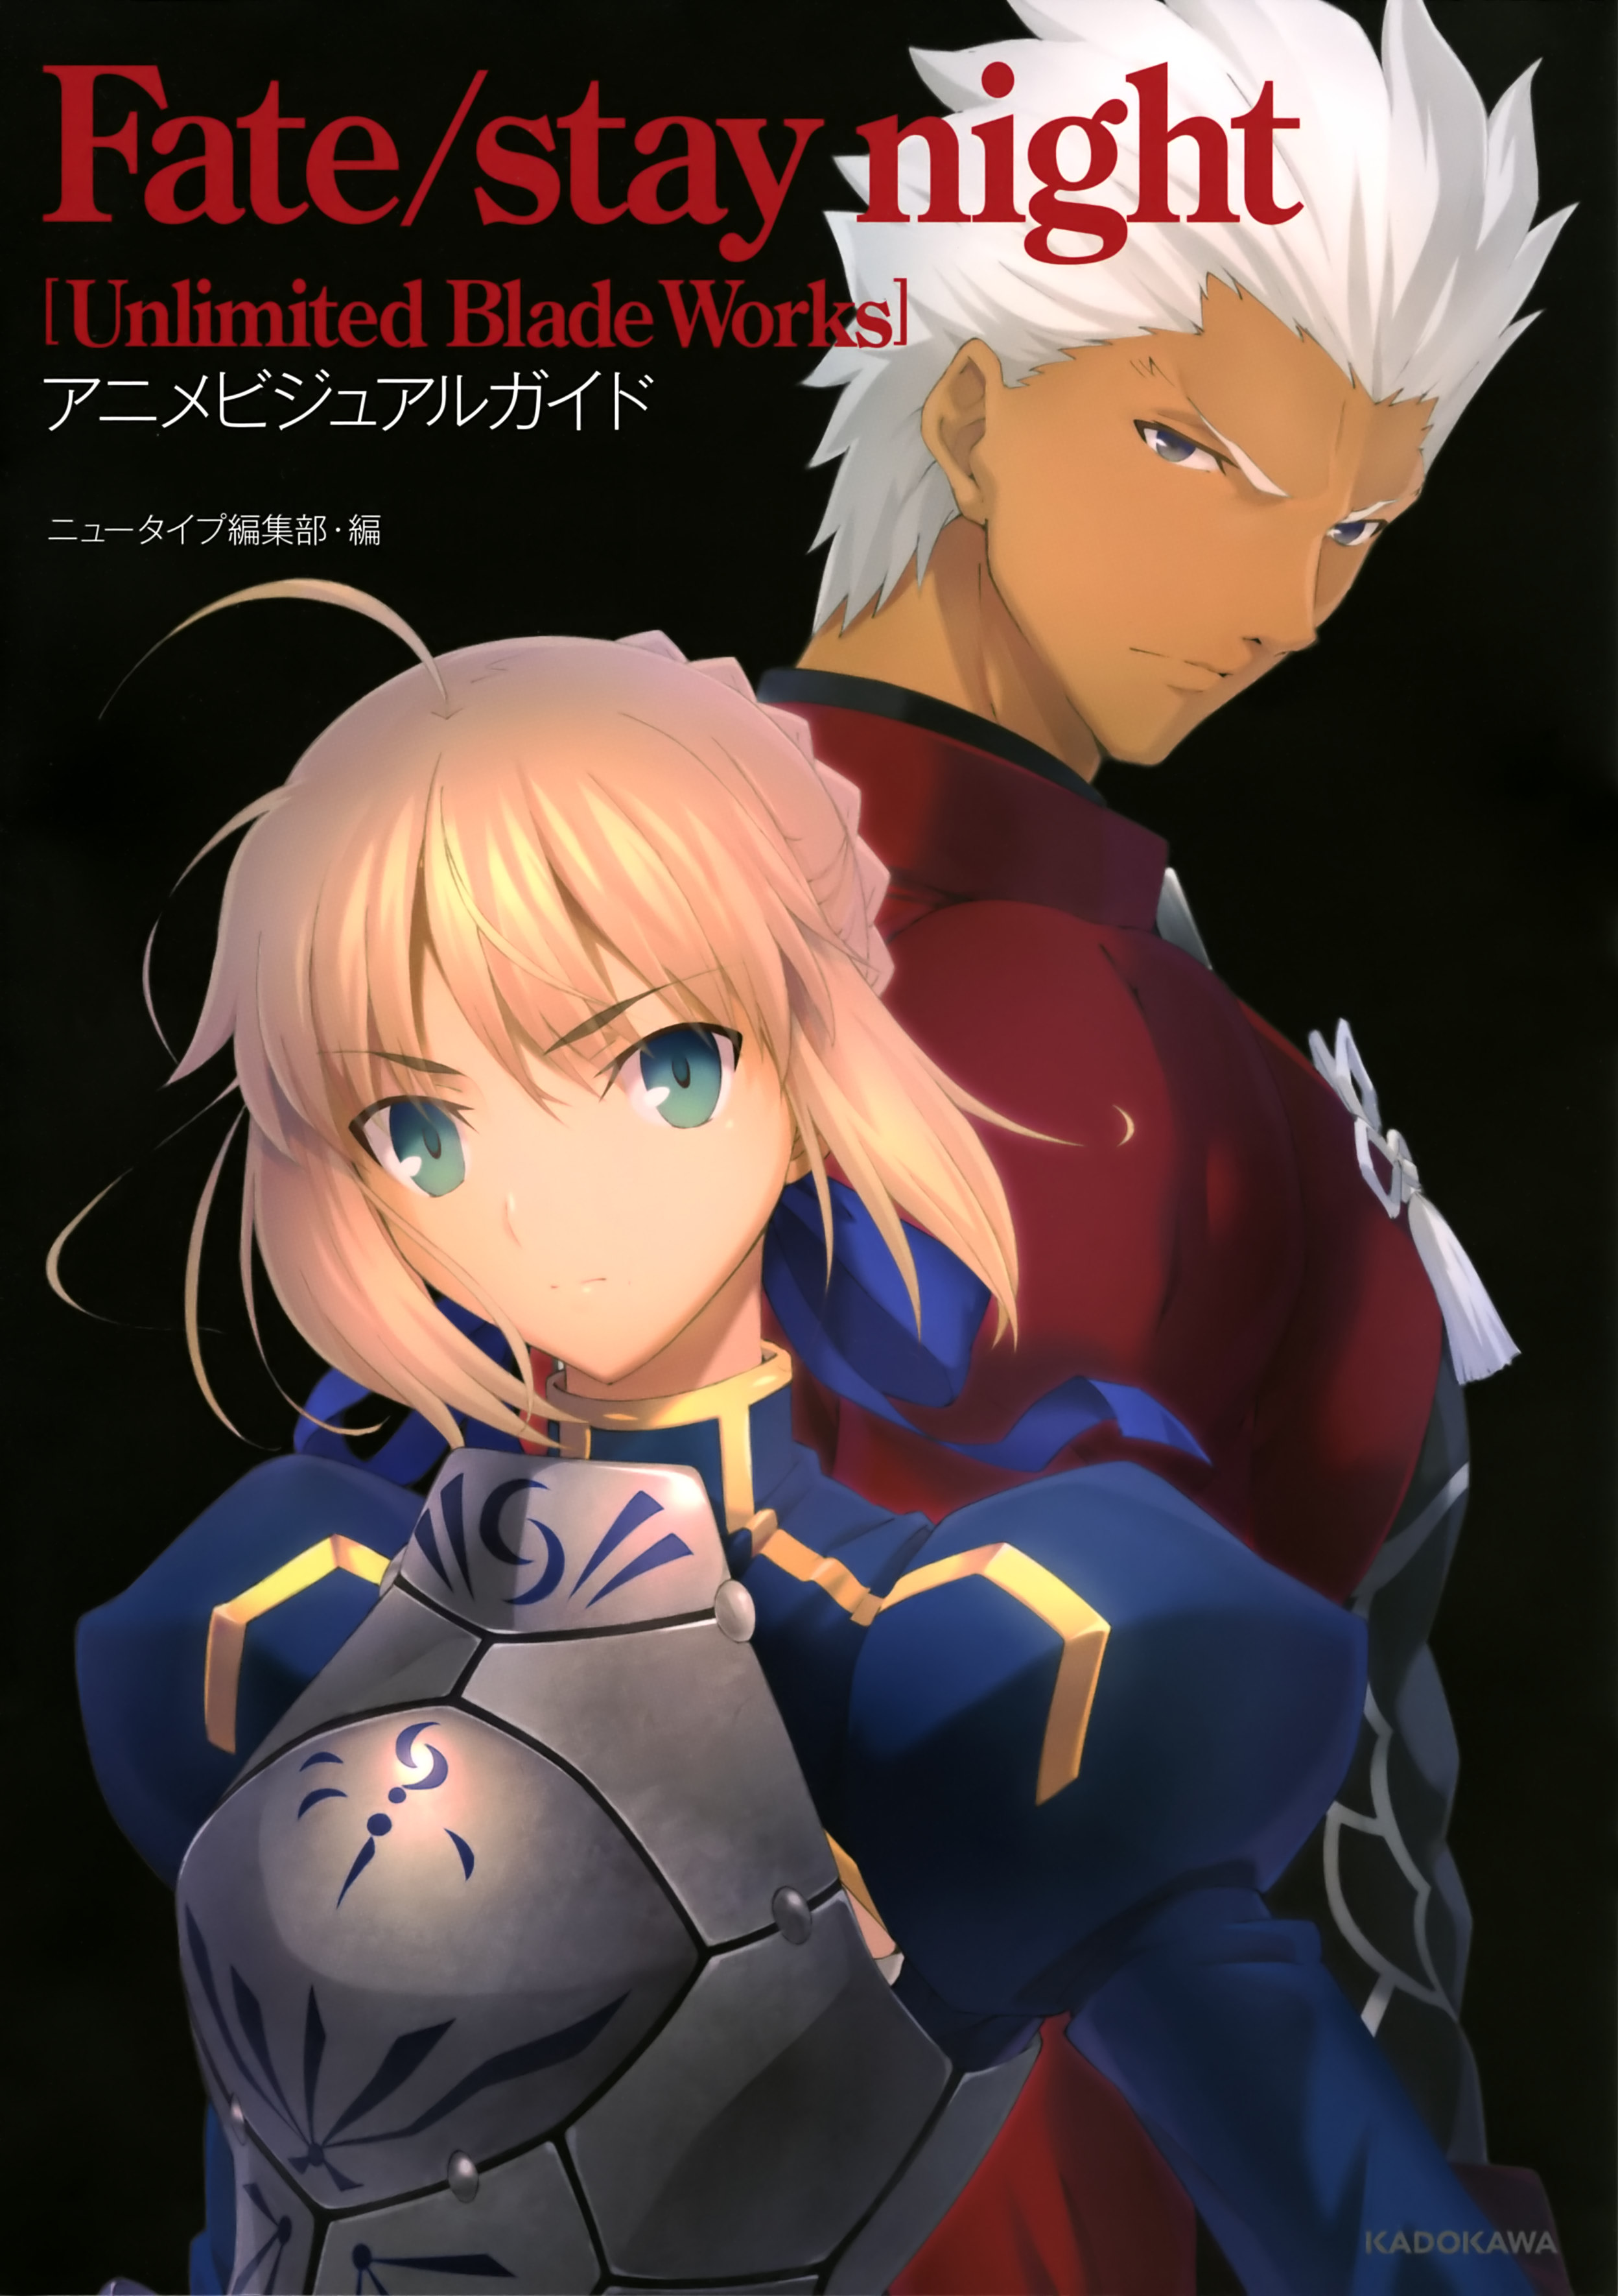 Fate Stay Night Fate Stay Night Unlimited Blade Works